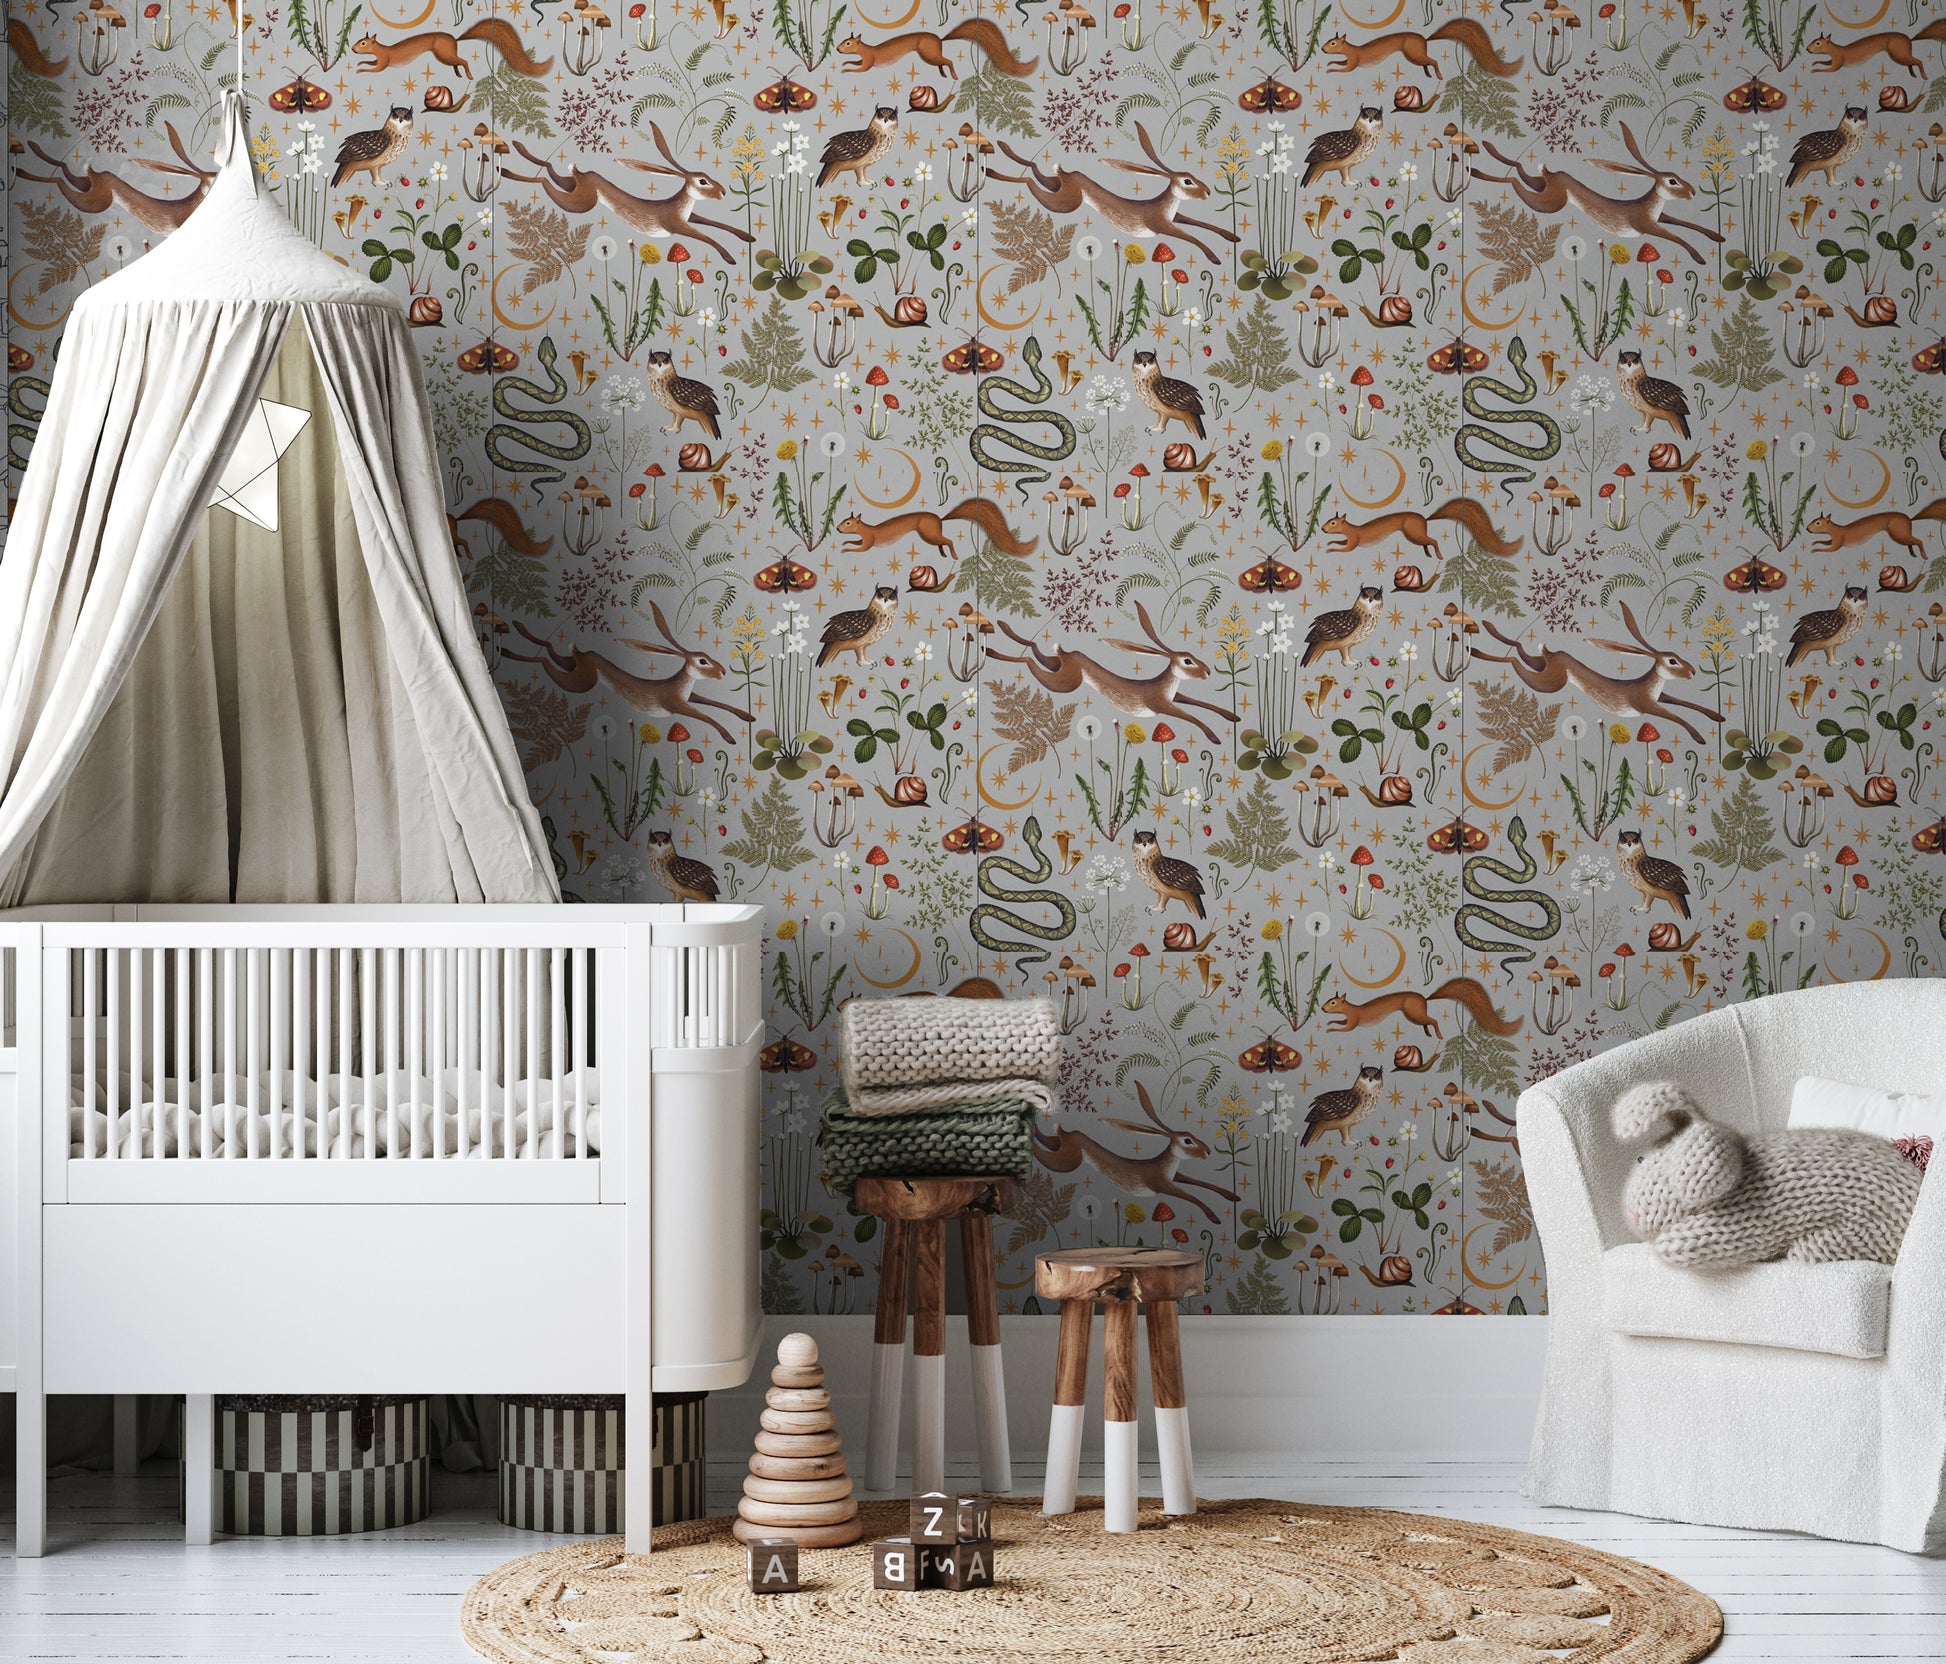 Woodland mushroom removable peel and stick wallpaper in all white nursery